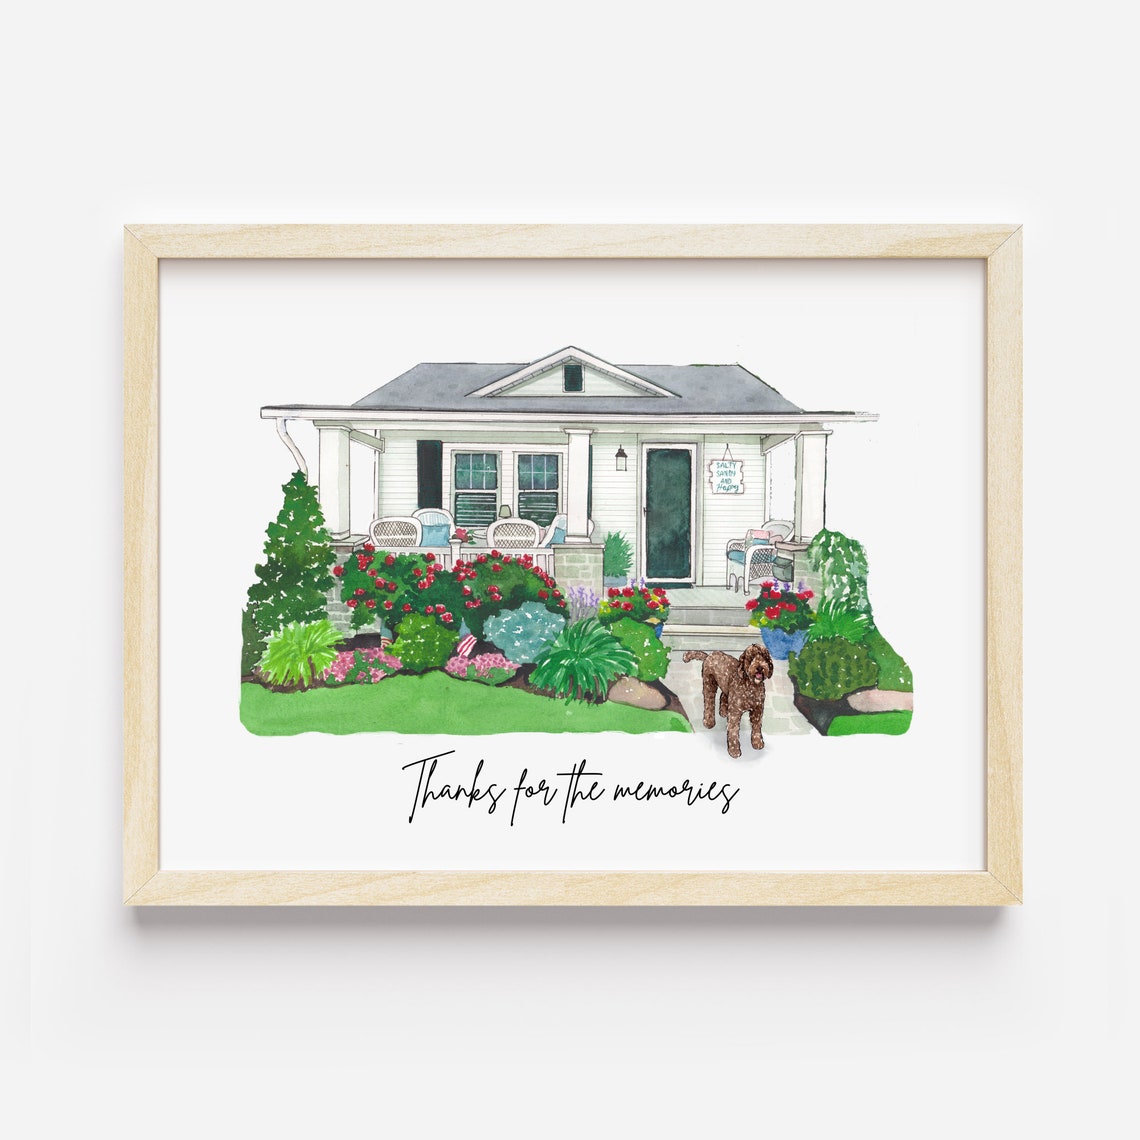 Custom Watercolor House Painting PrintHouse Painting From image 1